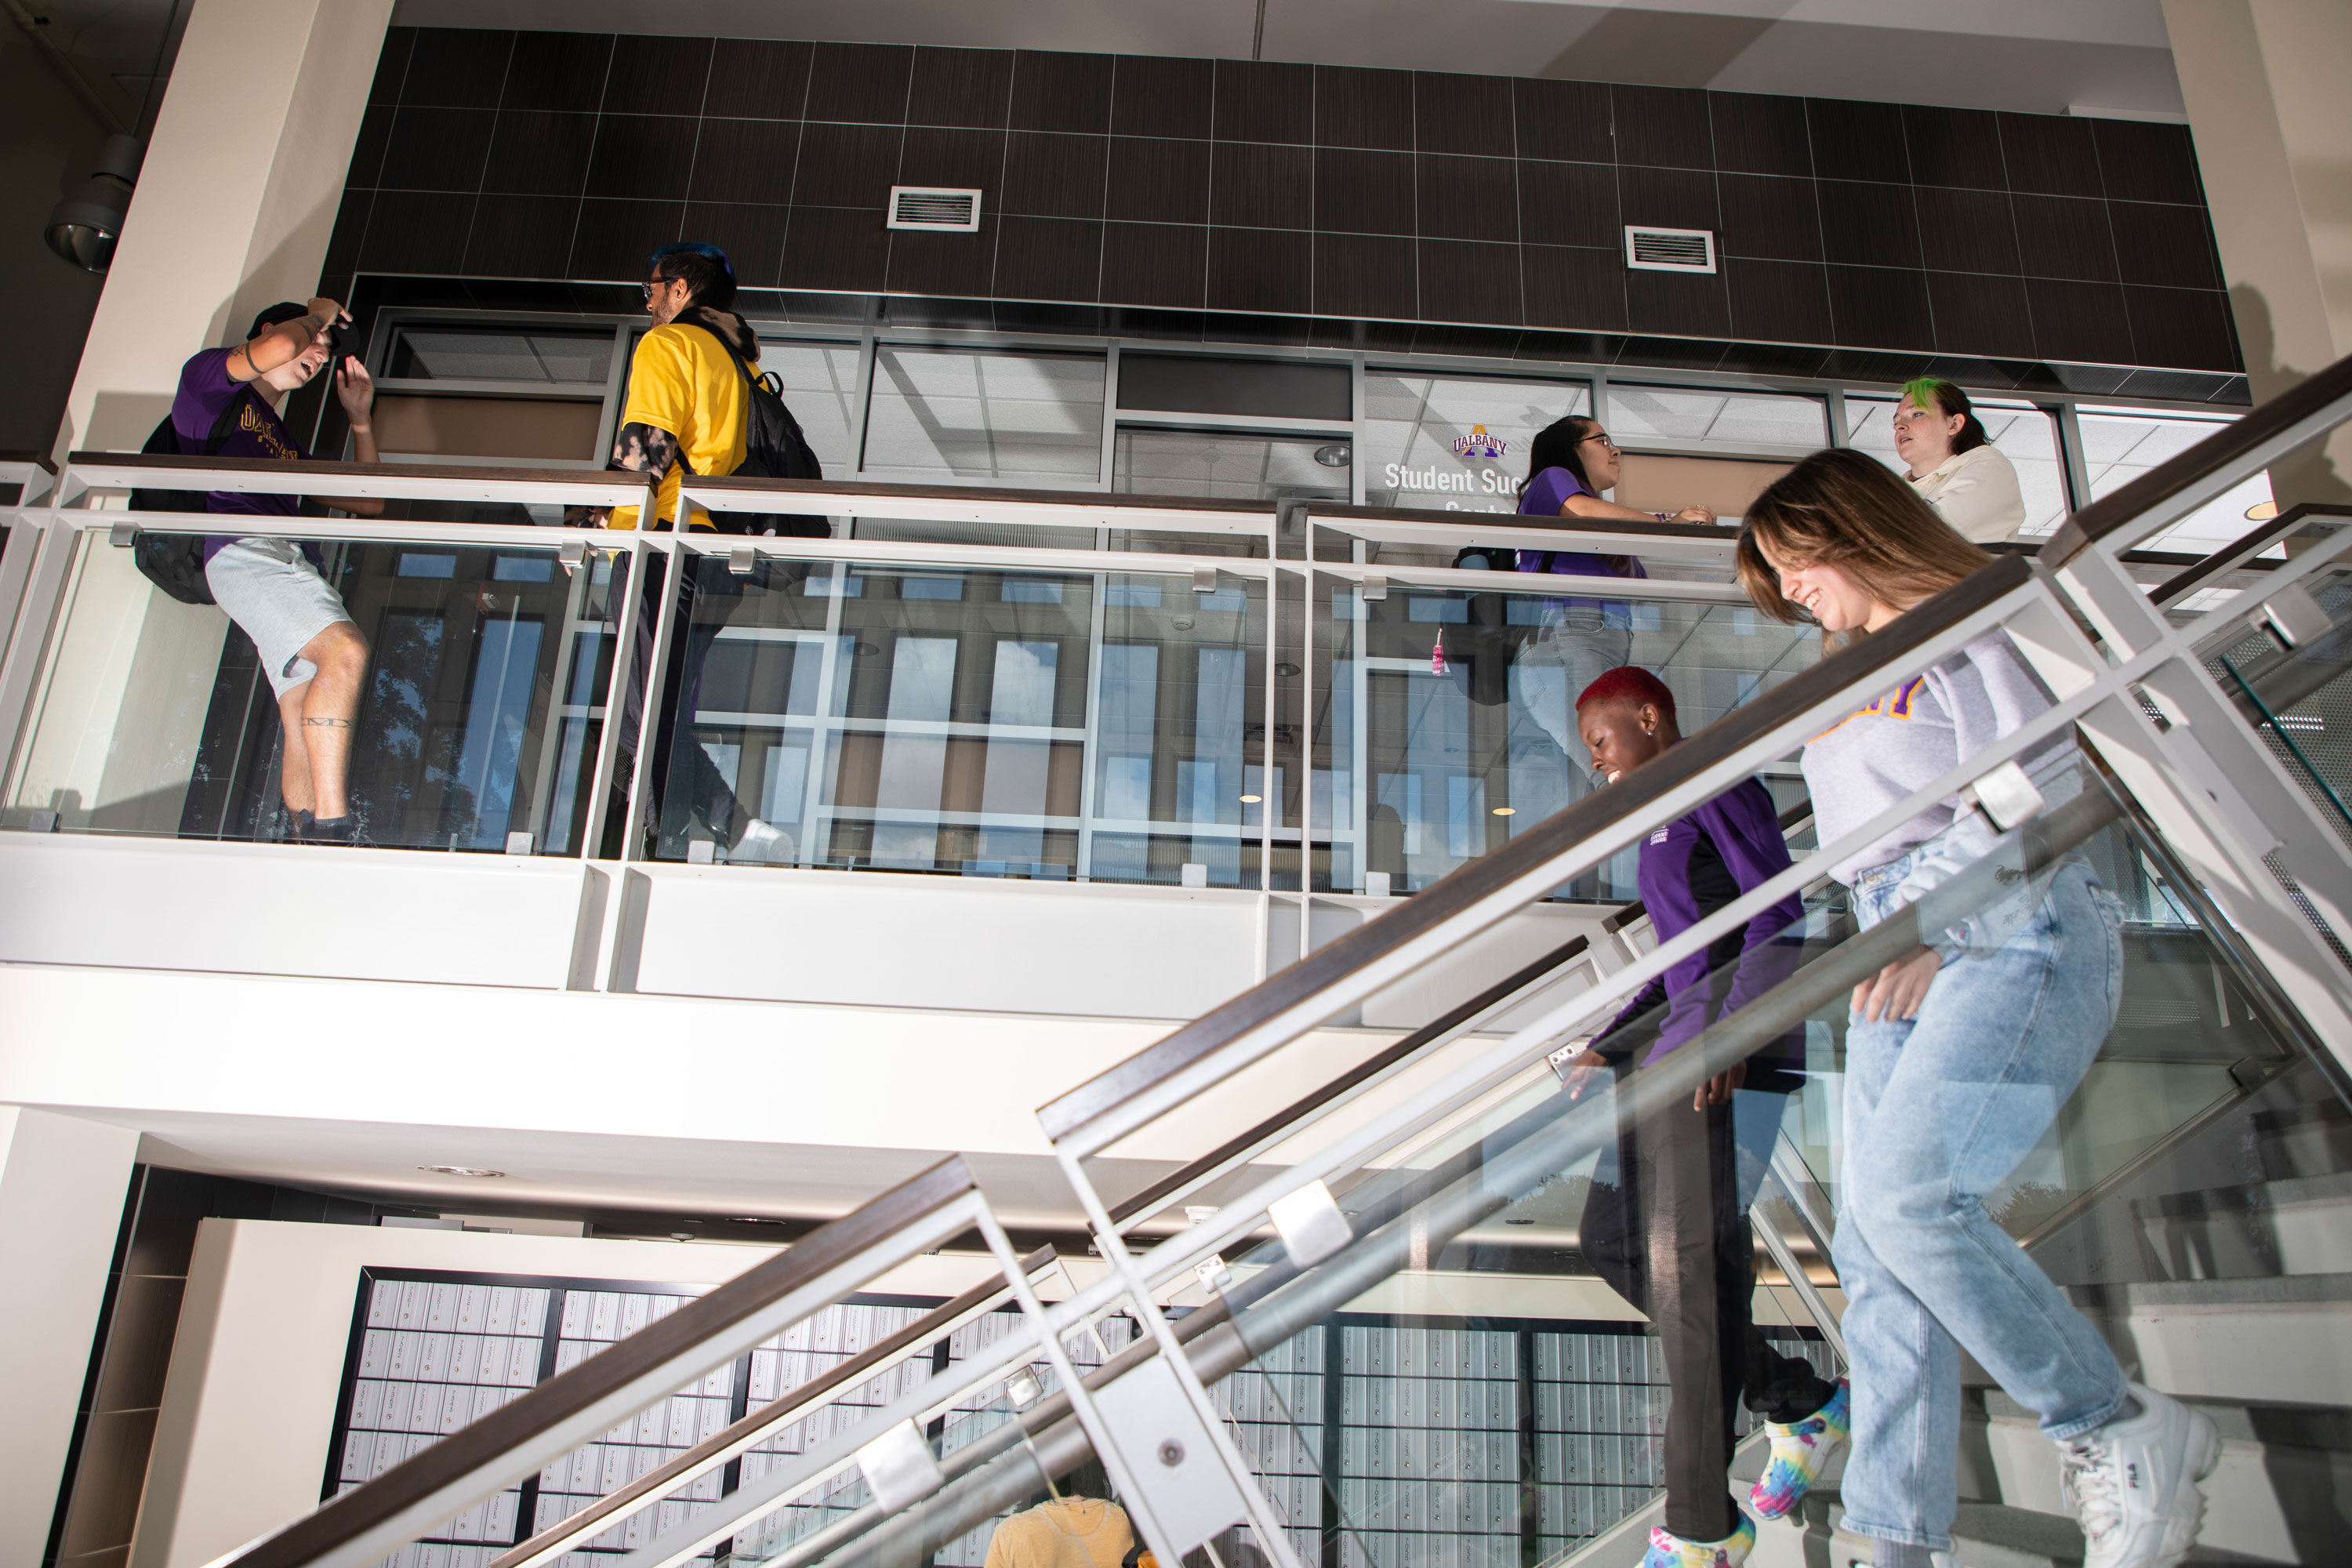 Four students stand and talk on an upper level inside State Quad, while two other students walk down a staircase outside the Student Success Center. The atrium is built with gray stone and glass.